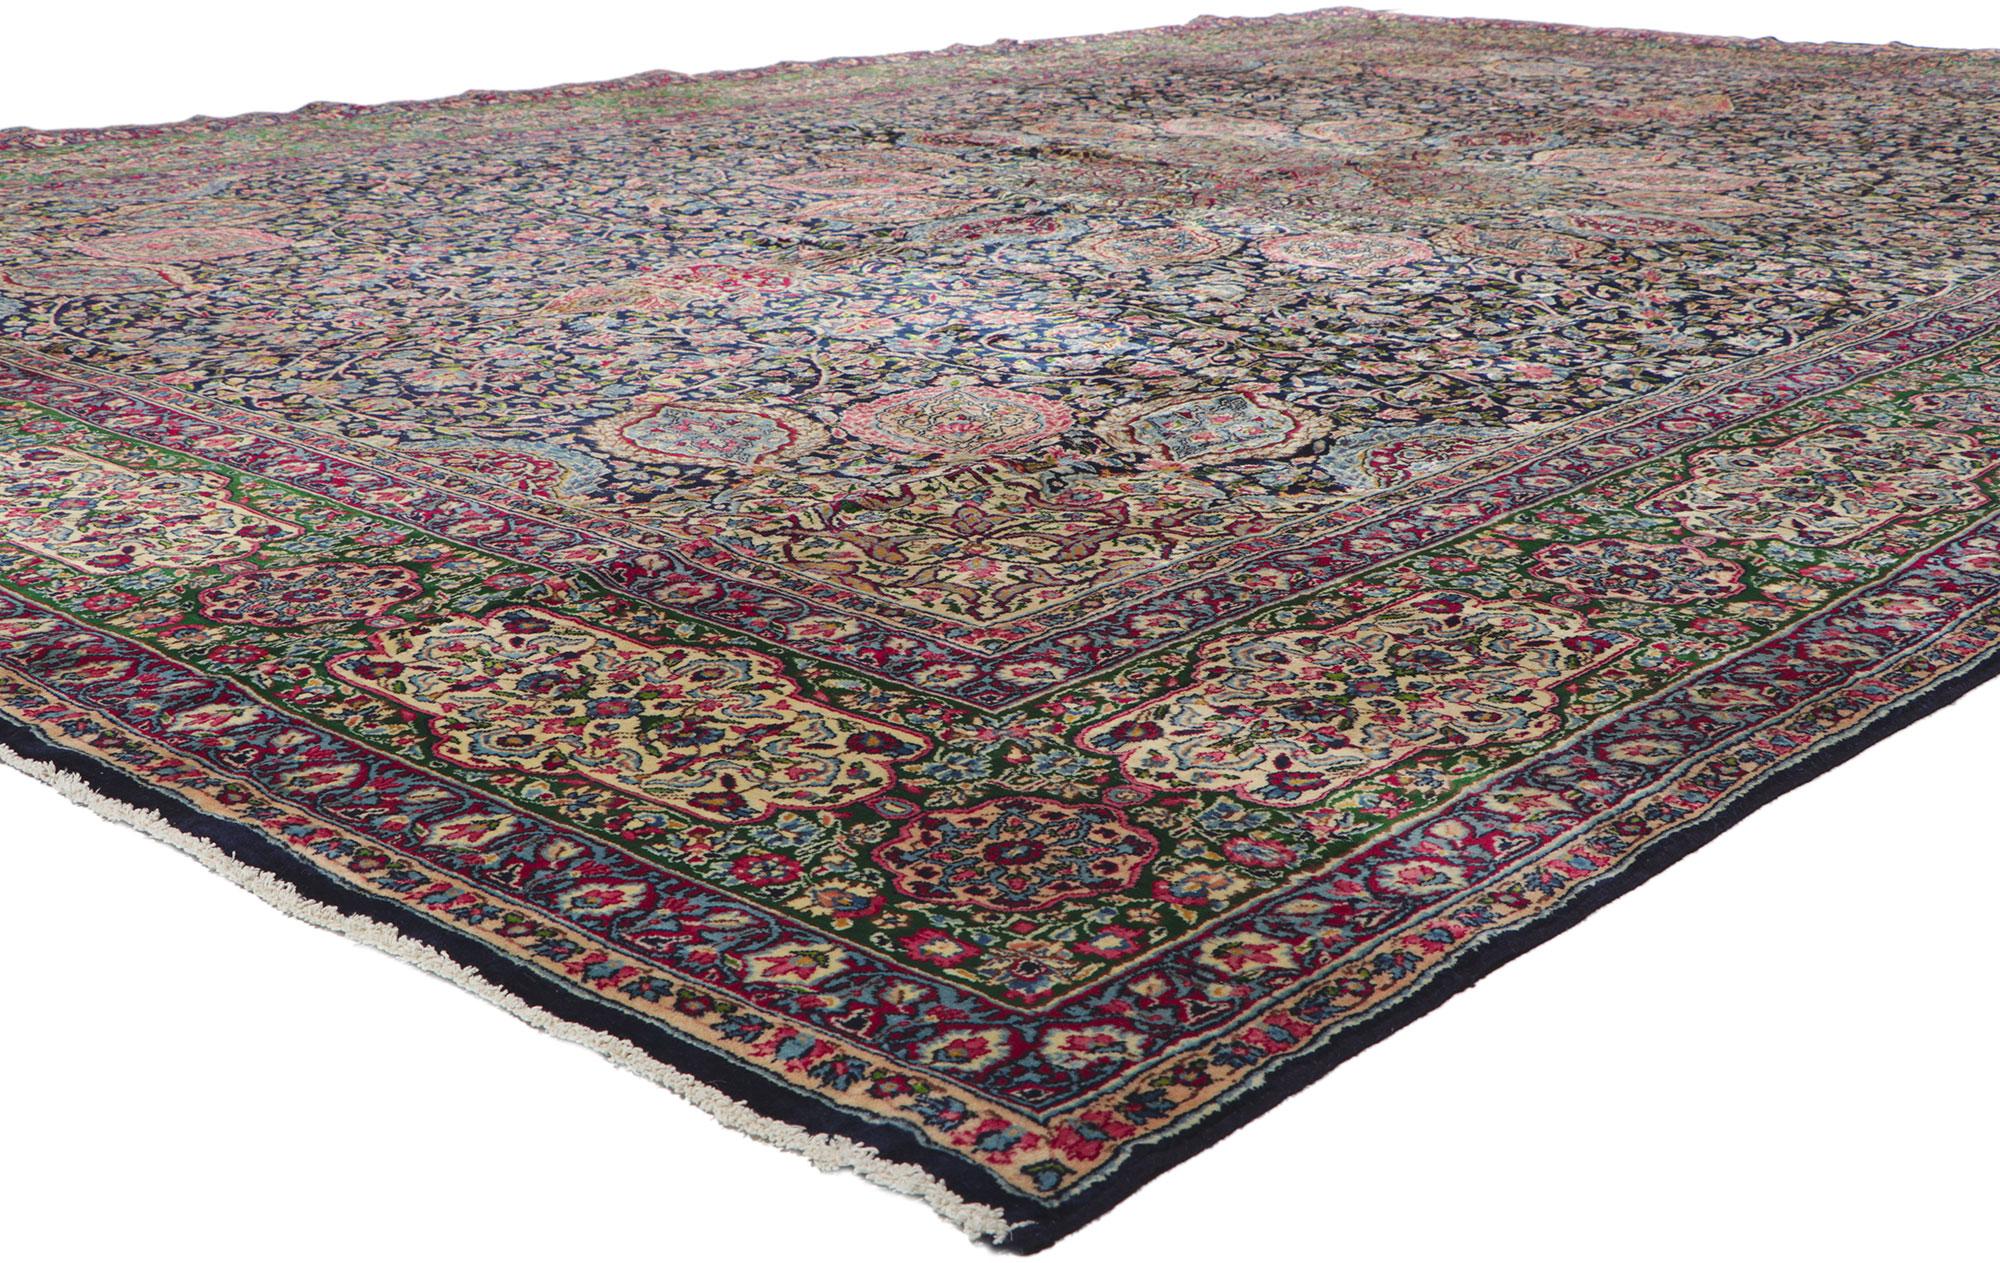 61108 Vintage Persian Kerman rug with The Ardabil Carpet Design, 11'02 x 16'03 Inspired from the Ardabil carpet from the Safavid dynasty, this hand-knotted wool vintage Persian Kerman rug is poised to impress. The abrashed navy blue field features a